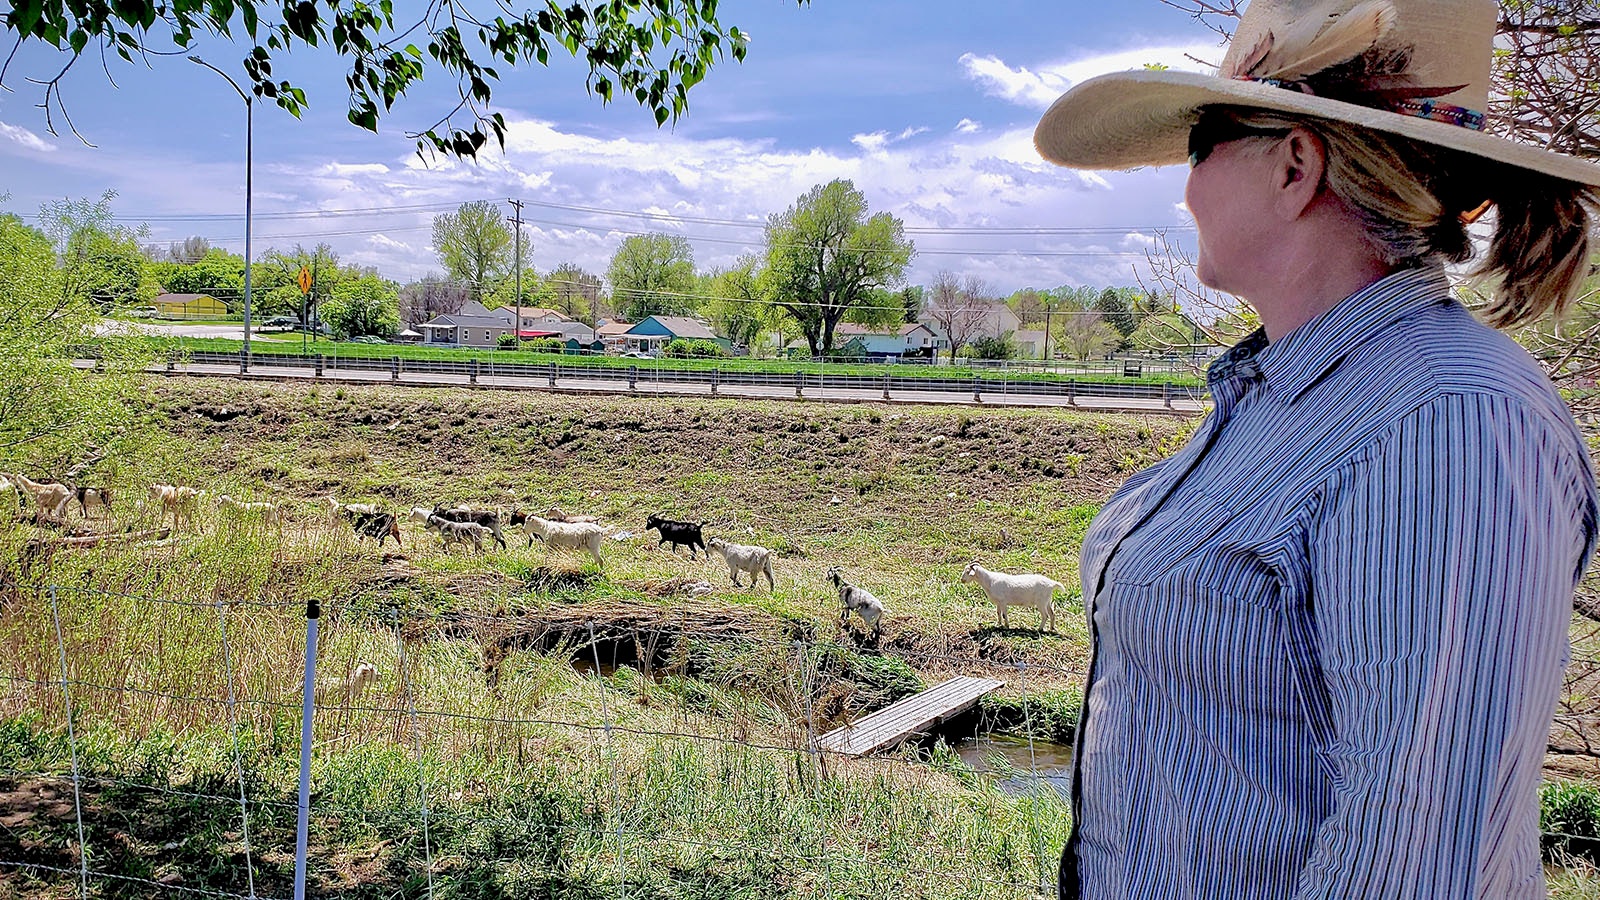 Lani Malmberg grew up on a ranch in Lander, and now operates a small army of 500 cashmere goats that travel around the U.S. West eating weeds.